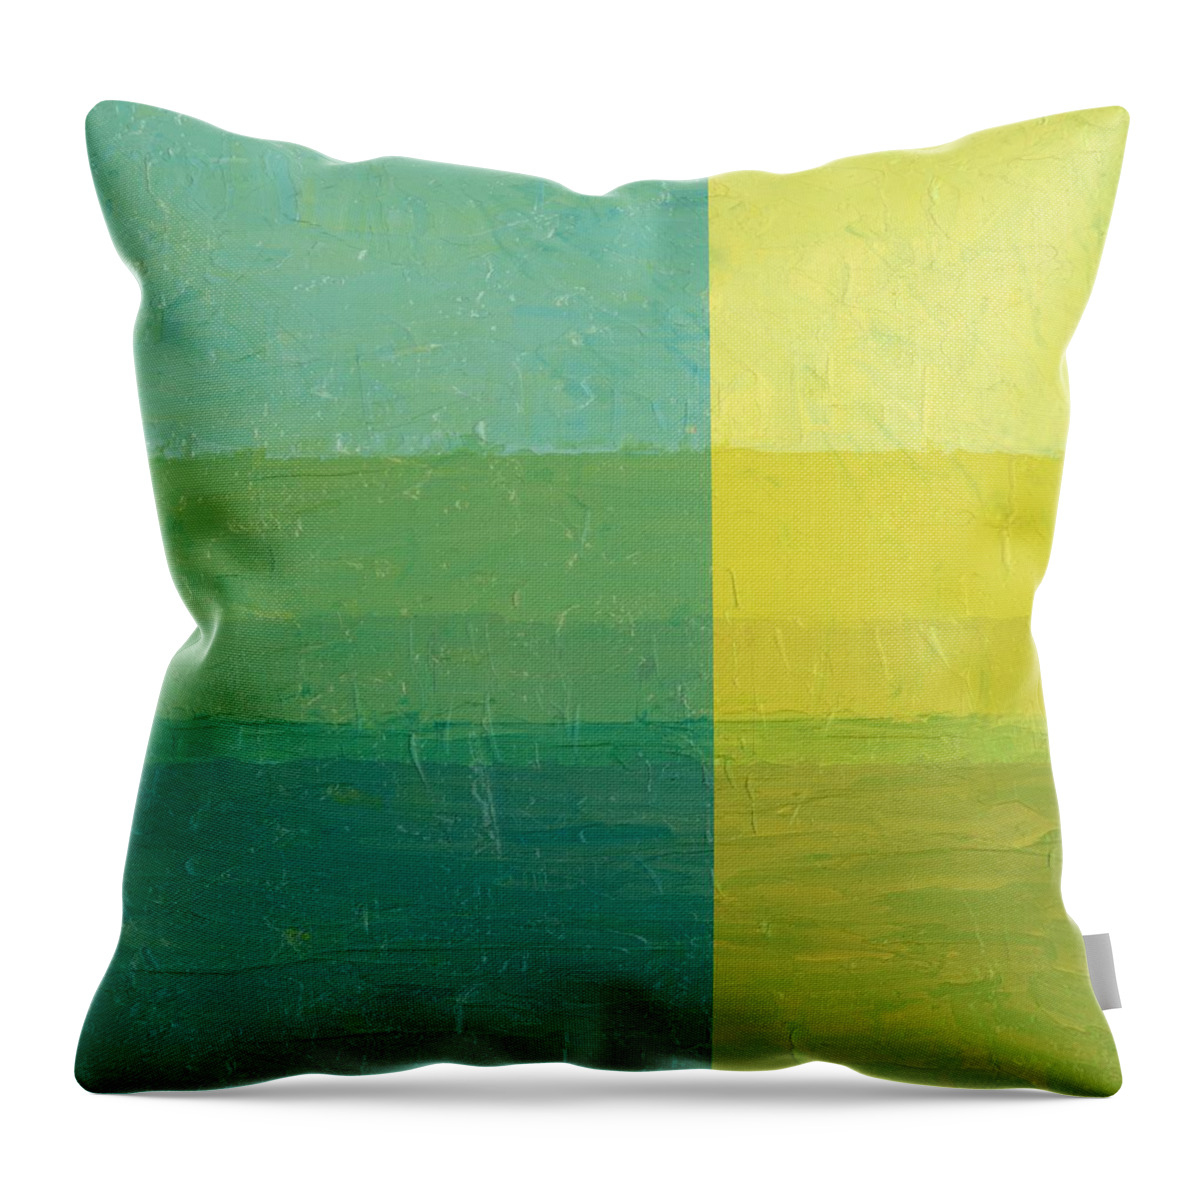 Day Throw Pillow featuring the painting Daybreak by Michelle Calkins